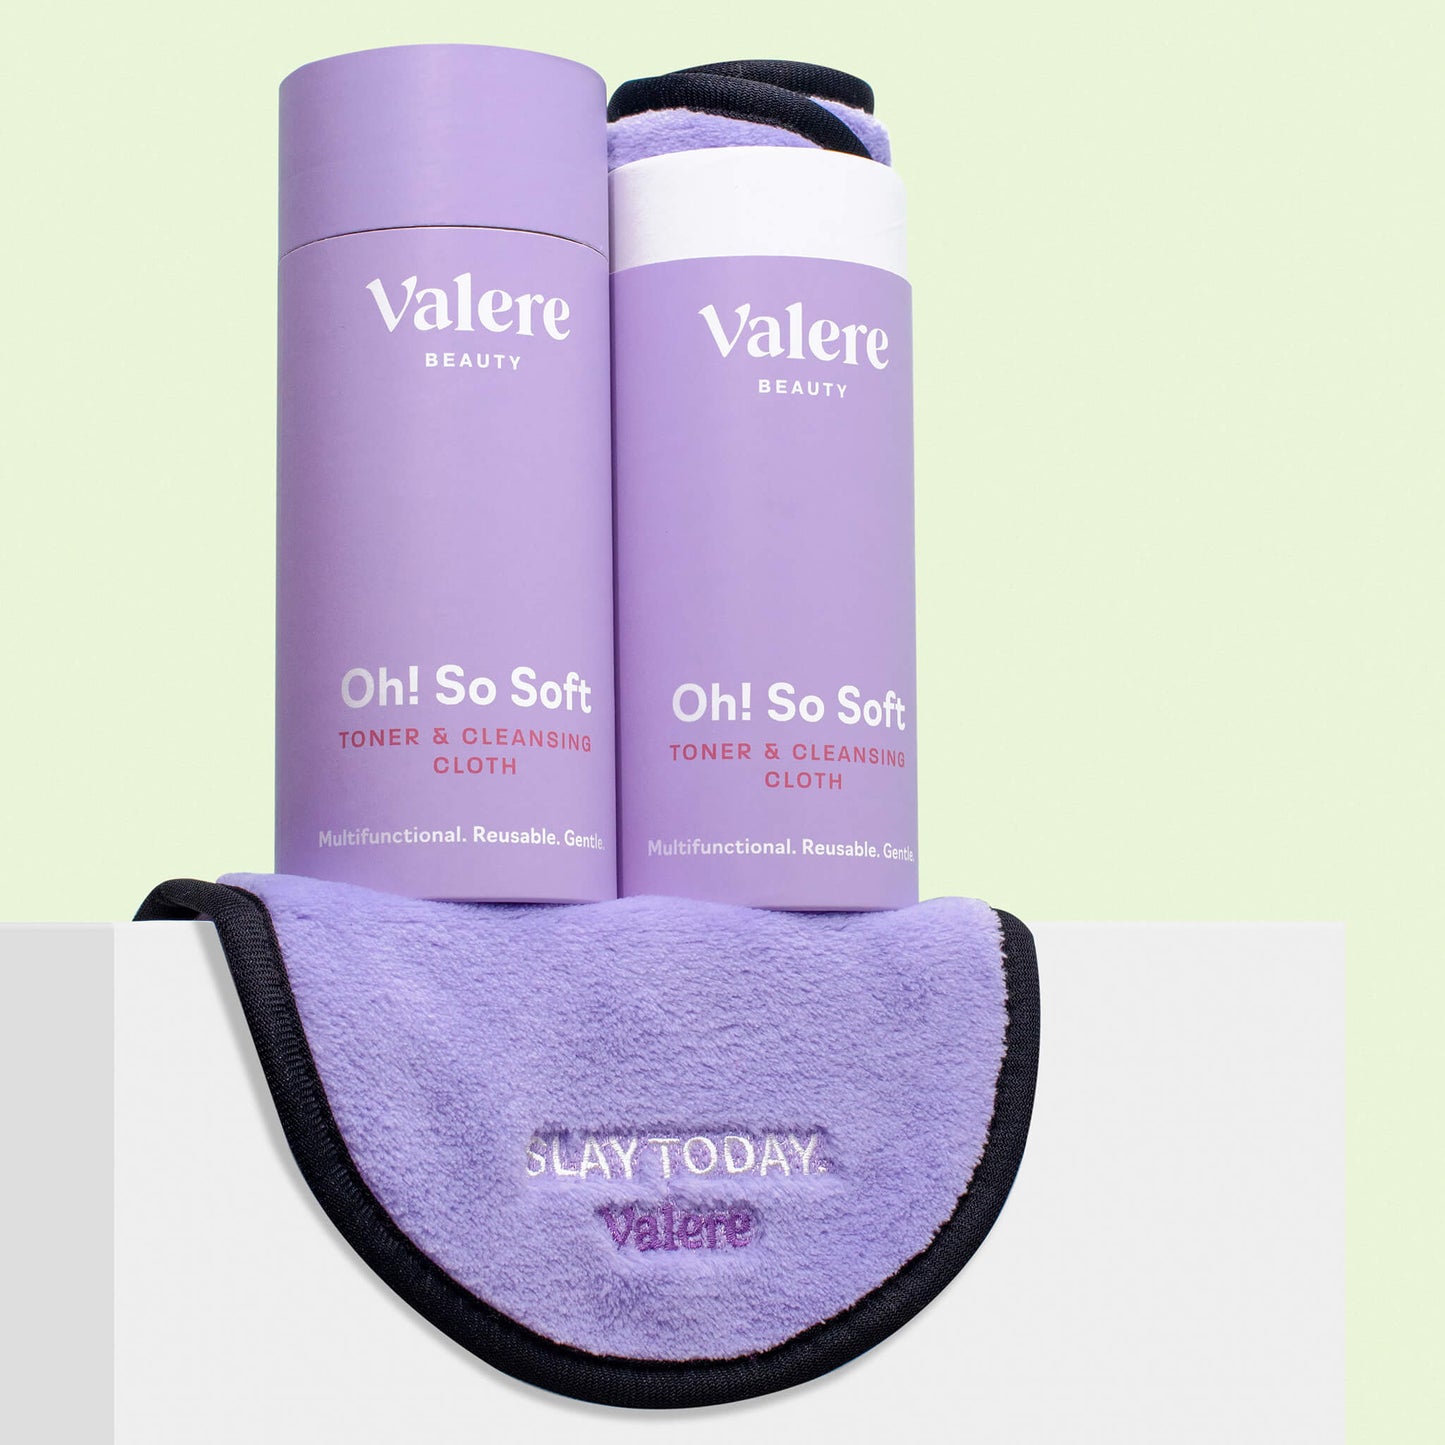 Valere Beauty Oh! So Soft Toner & Cleansing Cloth Microfiber Makeup Remover Cloth and Bamboo Cotton Toner Cloth Double Bundle